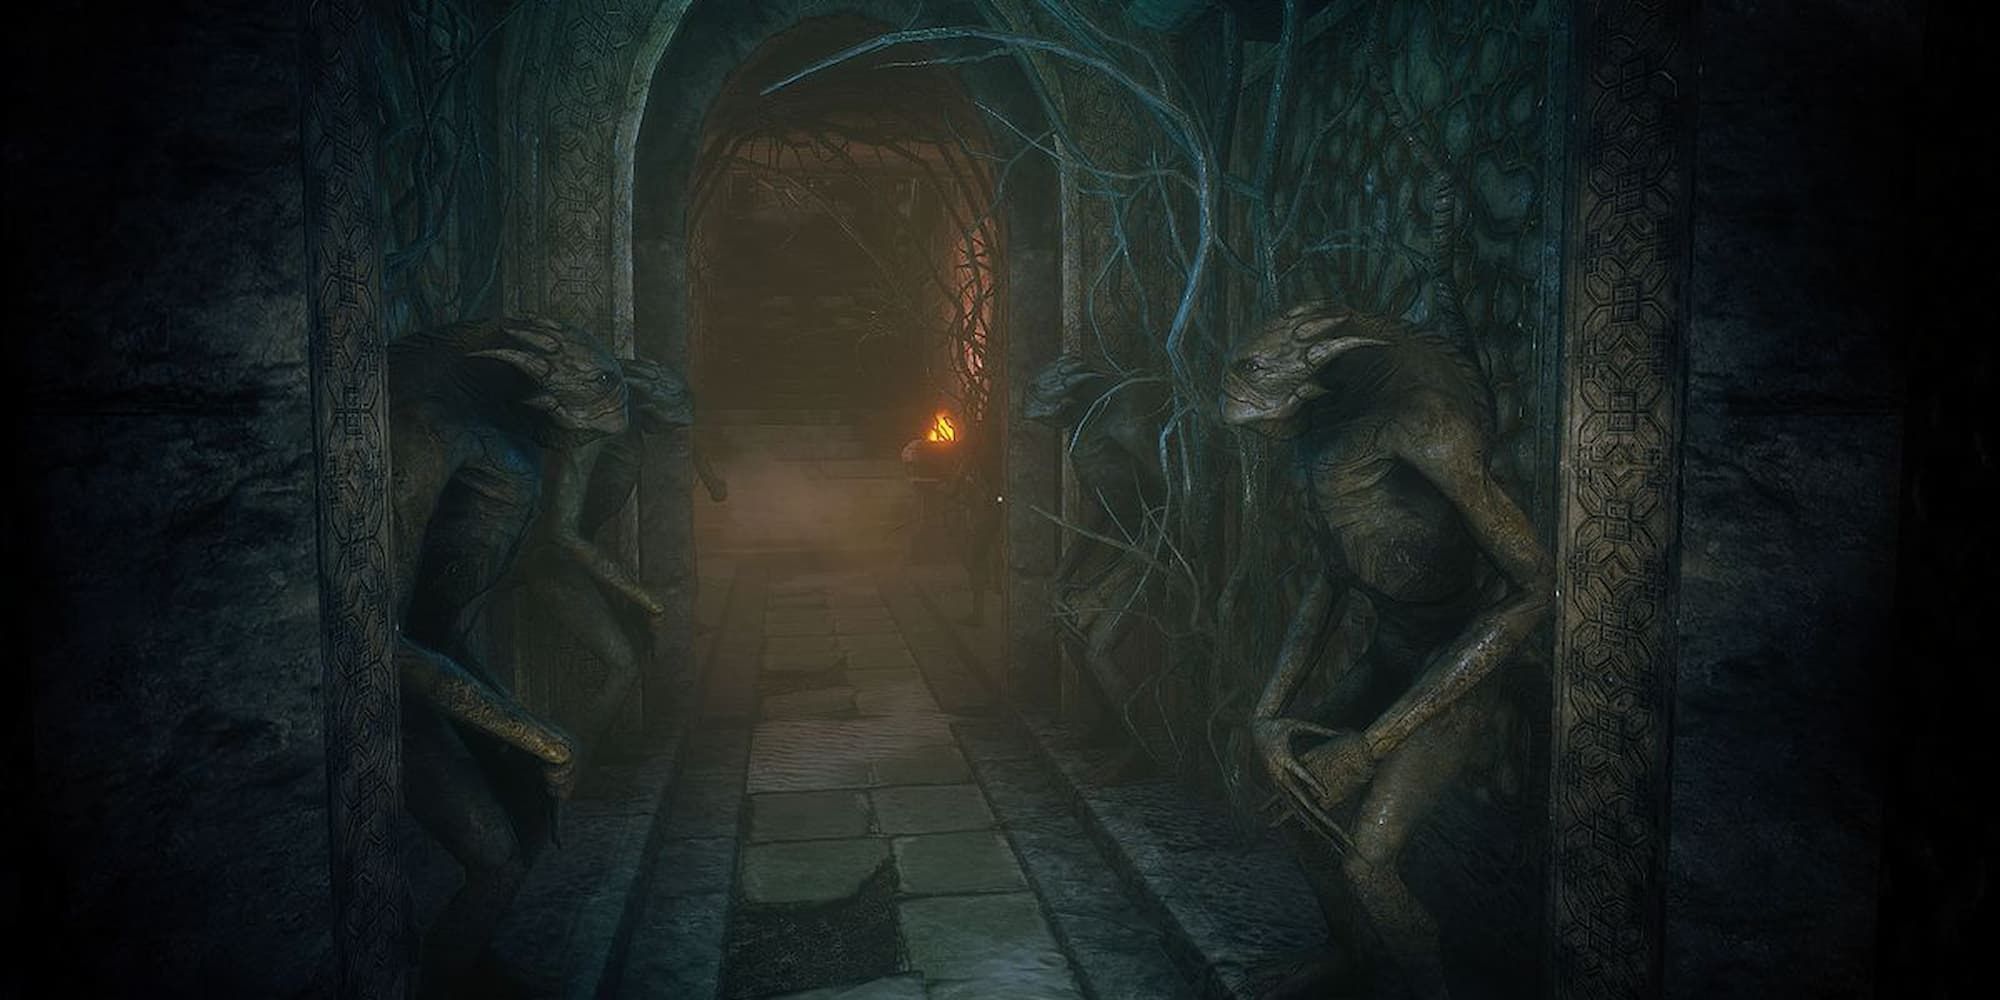 The Antarctic archeological site in Conarium is a narrow pathway lined with markings on the wall and statues of demonic creatures.